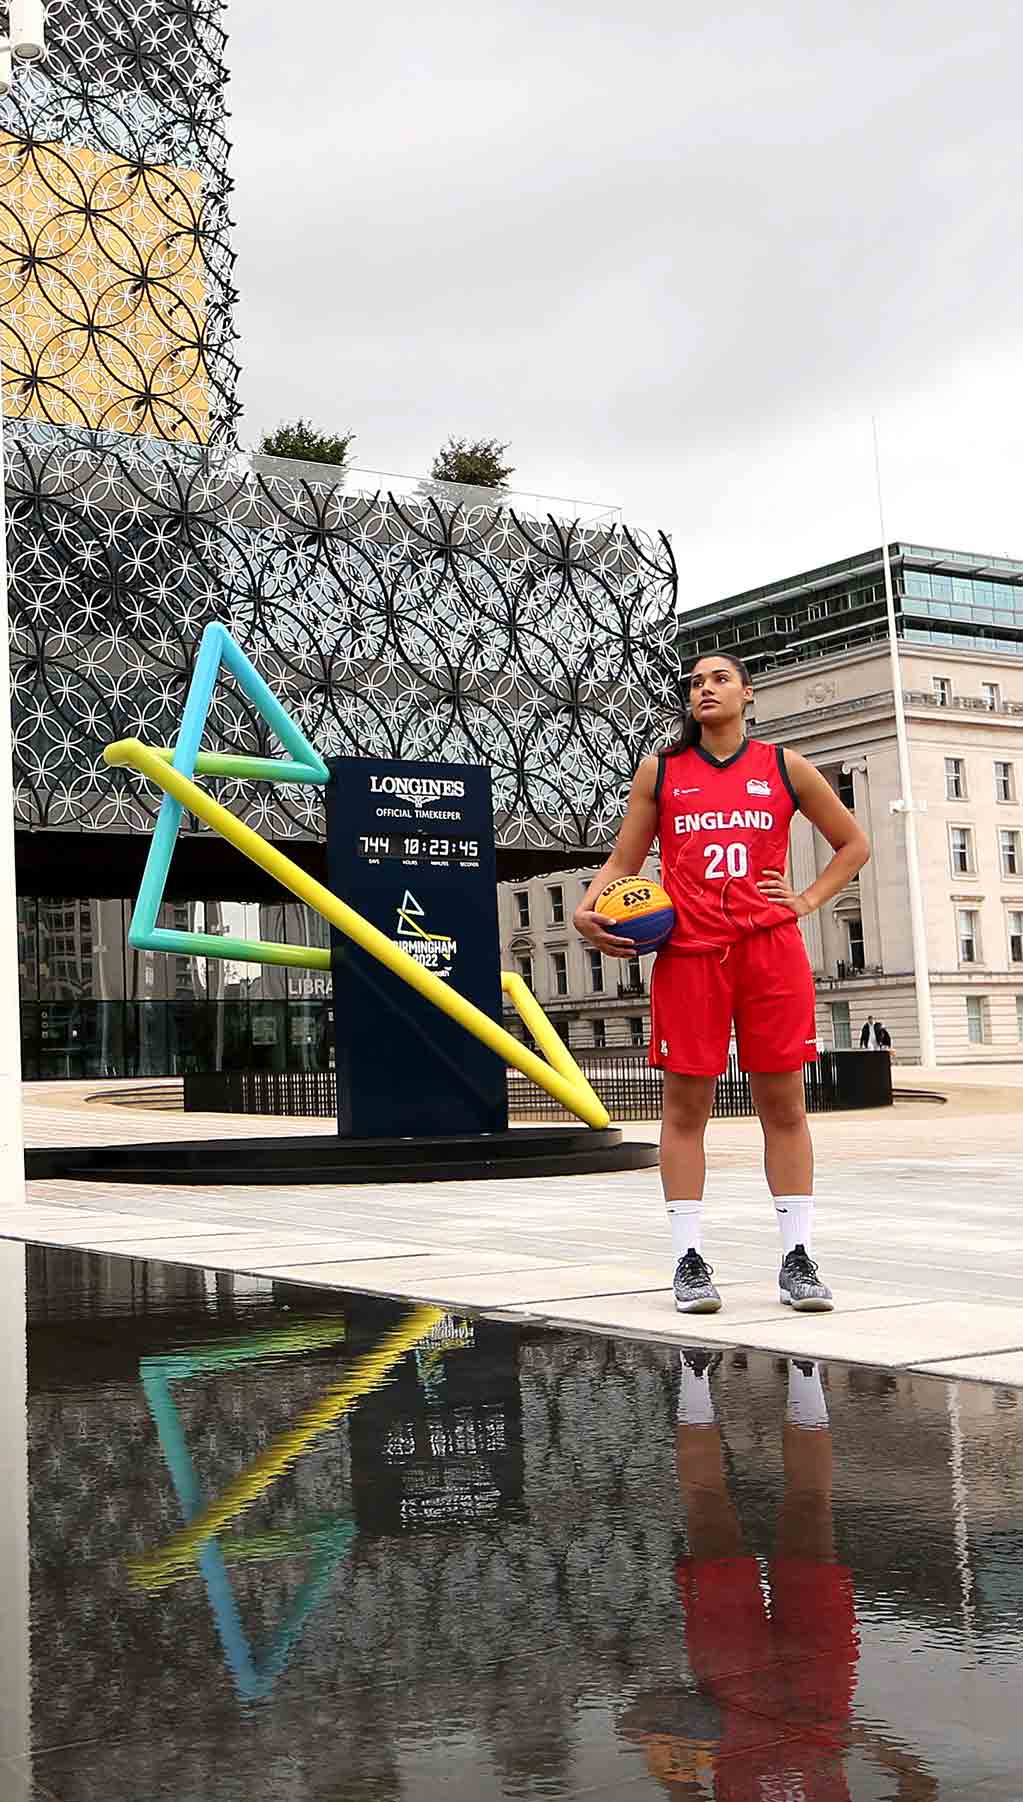 Female Basketball Athlete in front of Games logo